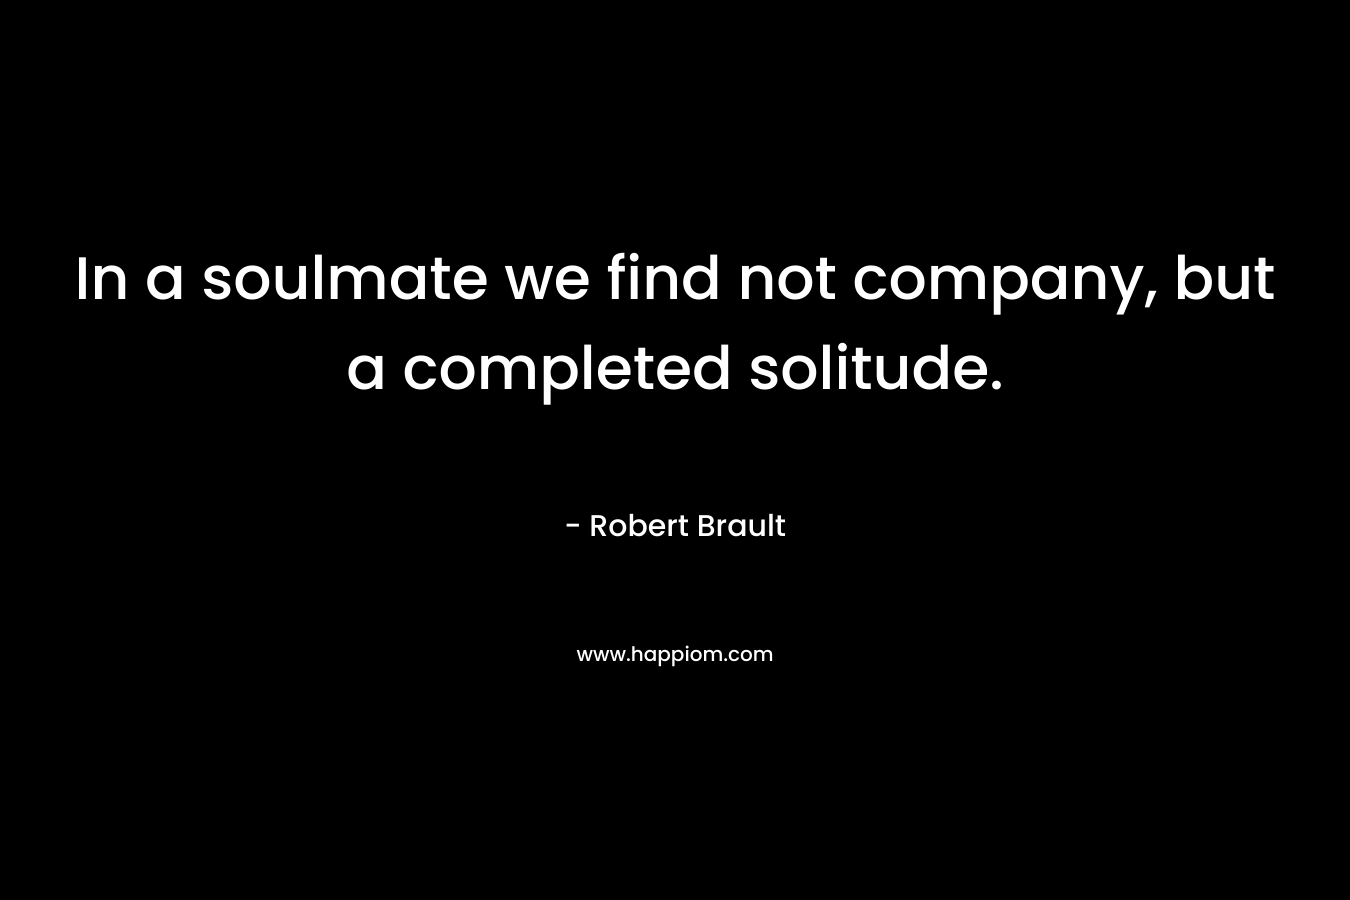 In a soulmate we find not company, but a completed solitude. – Robert Brault